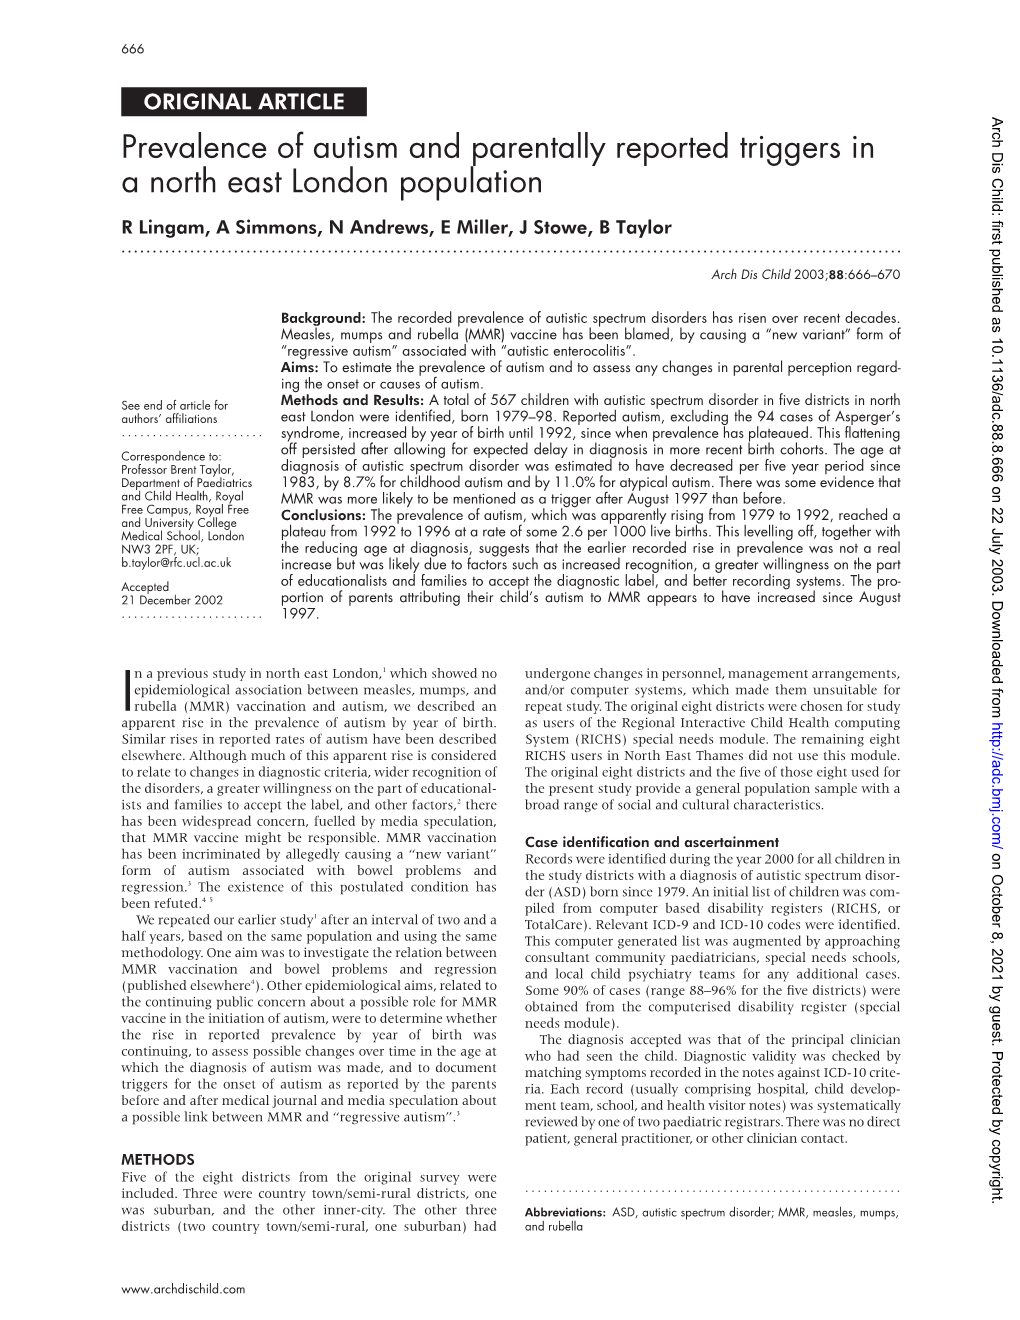 Prevalence of Autism and Parentally Reported Triggers in a North East London Population R Lingam, a Simmons, N Andrews, E Miller, J Stowe, B Taylor